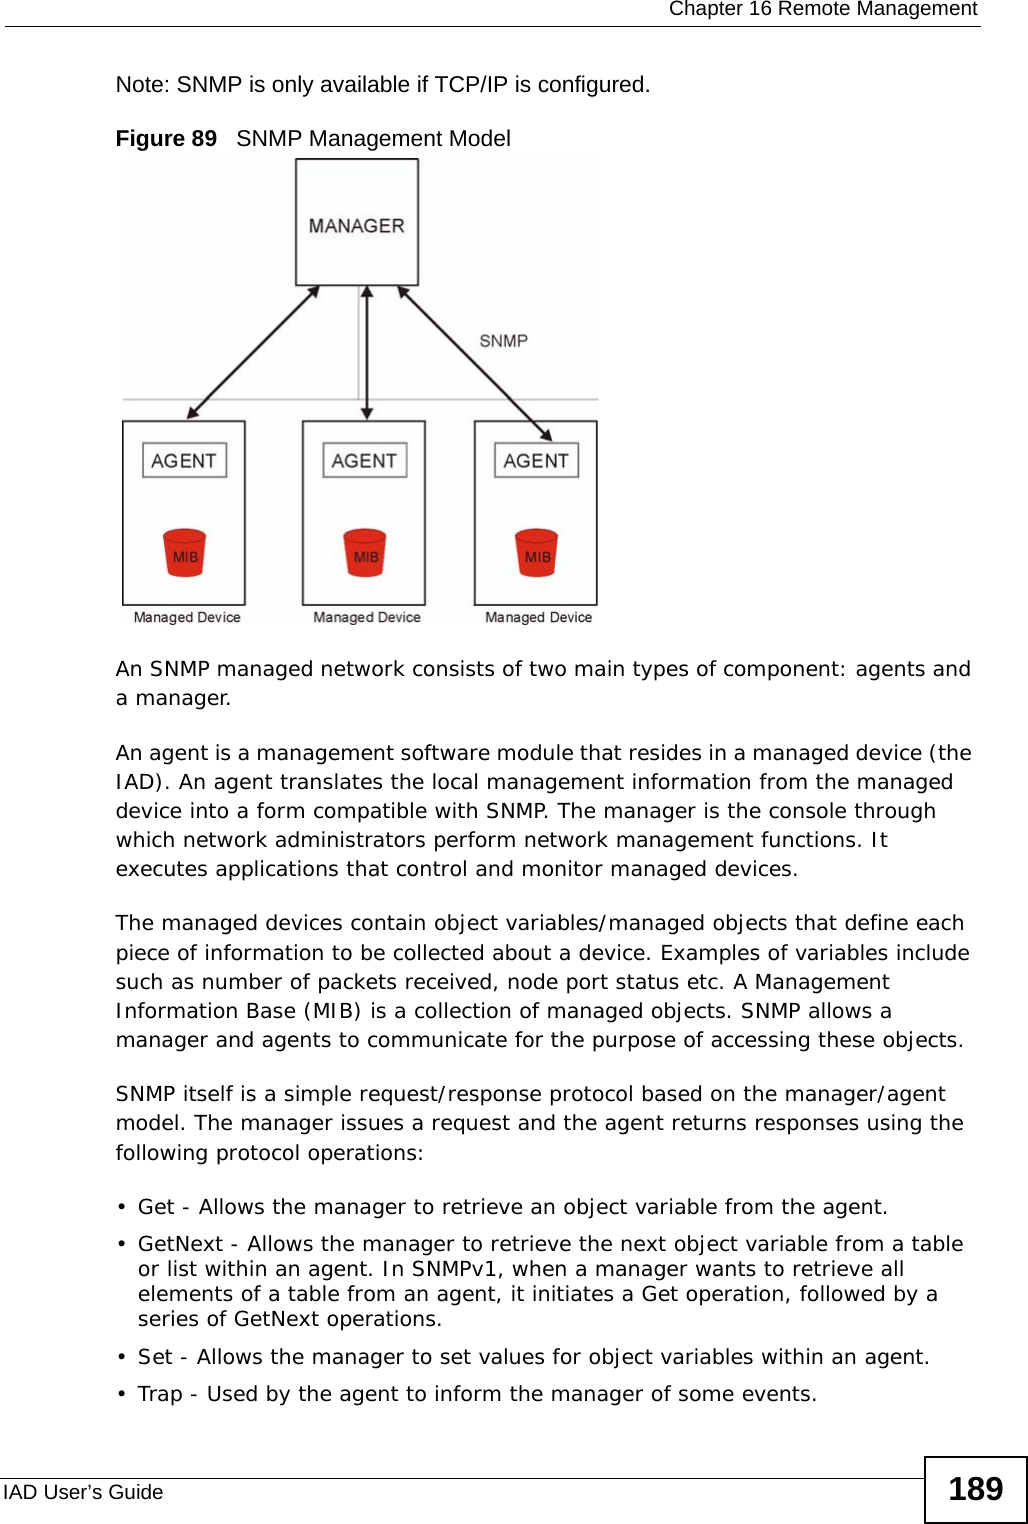  Chapter 16 Remote ManagementIAD User’s Guide 189Note: SNMP is only available if TCP/IP is configured.Figure 89   SNMP Management ModelAn SNMP managed network consists of two main types of component: agents and a manager. An agent is a management software module that resides in a managed device (the IAD). An agent translates the local management information from the managed device into a form compatible with SNMP. The manager is the console through which network administrators perform network management functions. It executes applications that control and monitor managed devices. The managed devices contain object variables/managed objects that define each piece of information to be collected about a device. Examples of variables include such as number of packets received, node port status etc. A Management Information Base (MIB) is a collection of managed objects. SNMP allows a manager and agents to communicate for the purpose of accessing these objects.SNMP itself is a simple request/response protocol based on the manager/agent model. The manager issues a request and the agent returns responses using the following protocol operations:• Get - Allows the manager to retrieve an object variable from the agent. • GetNext - Allows the manager to retrieve the next object variable from a table or list within an agent. In SNMPv1, when a manager wants to retrieve all elements of a table from an agent, it initiates a Get operation, followed by a series of GetNext operations. • Set - Allows the manager to set values for object variables within an agent. • Trap - Used by the agent to inform the manager of some events.